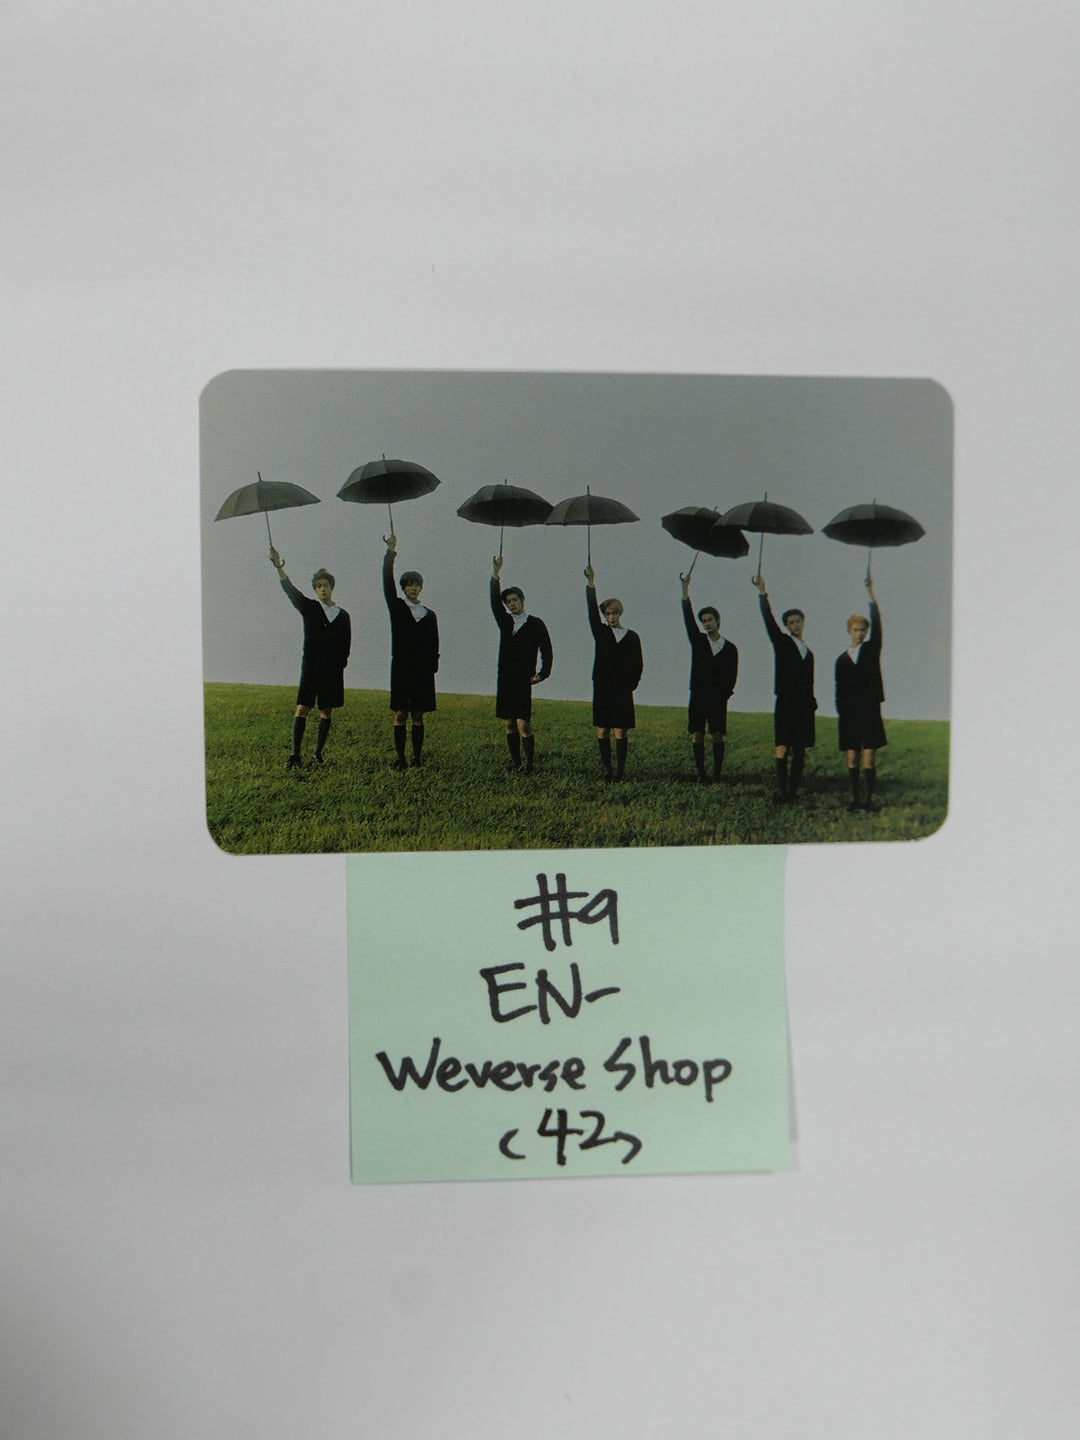 ENHYPEN "Dimension : Answer" - Weverse Shop Pre-Order Benefit Photocard Round 2